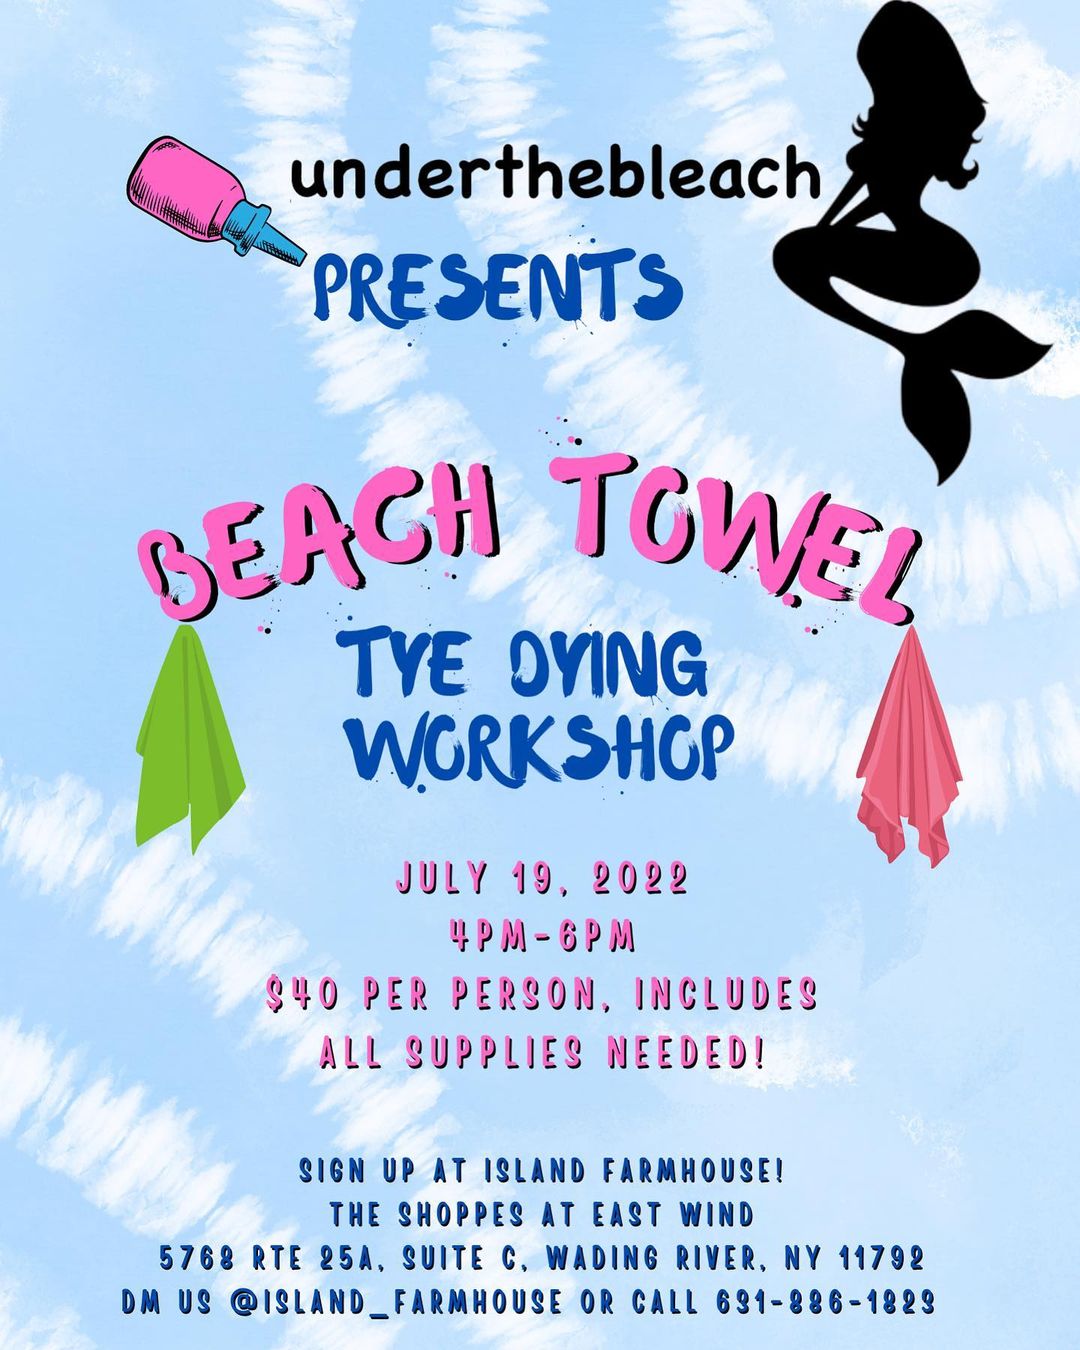 Beach Towel Tye Dying Workshop at The Shoppes